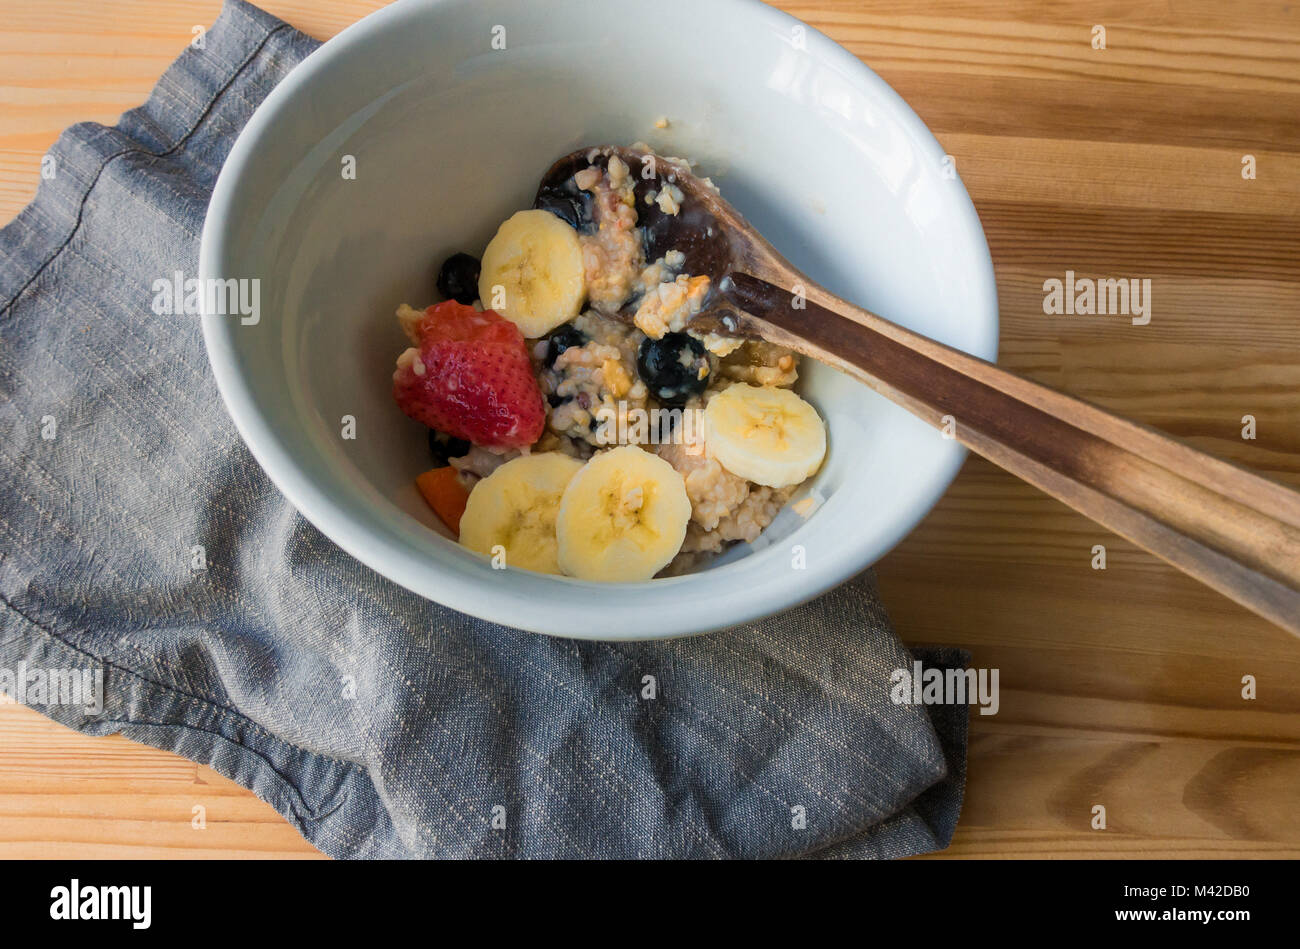 Oatmeal with fruit Stock Photo